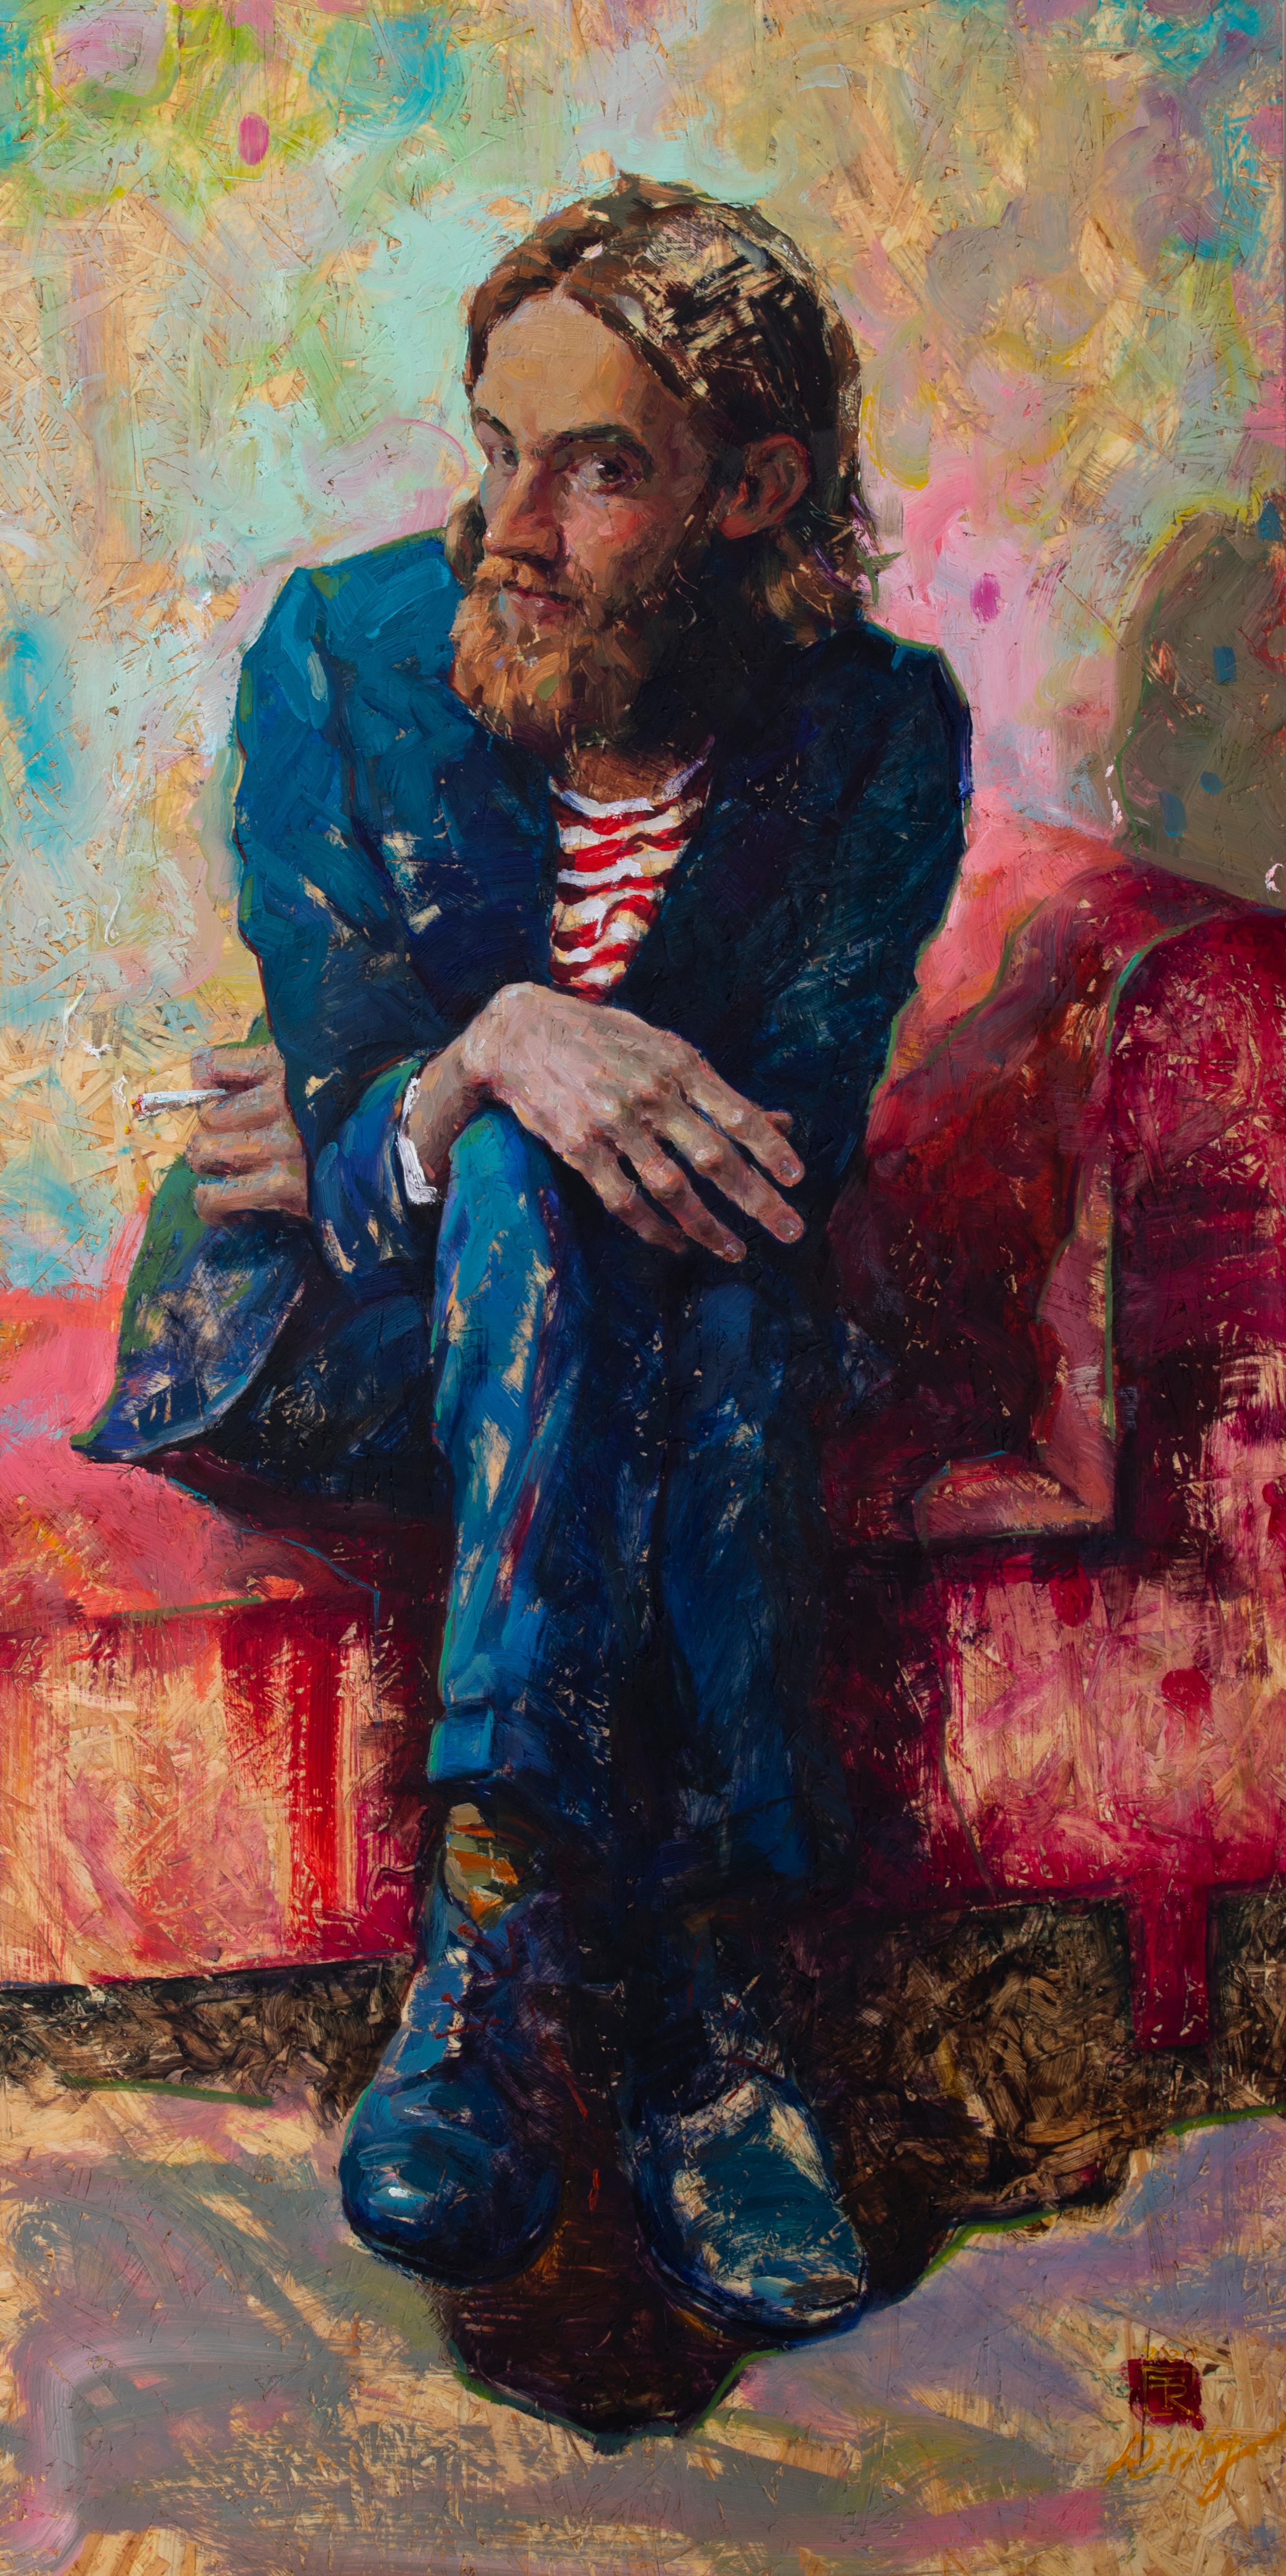 Tania Rivilis Figurative Painting - Poët from St Moritz- 21st Century Contemporary Figure Painting of a man smoking